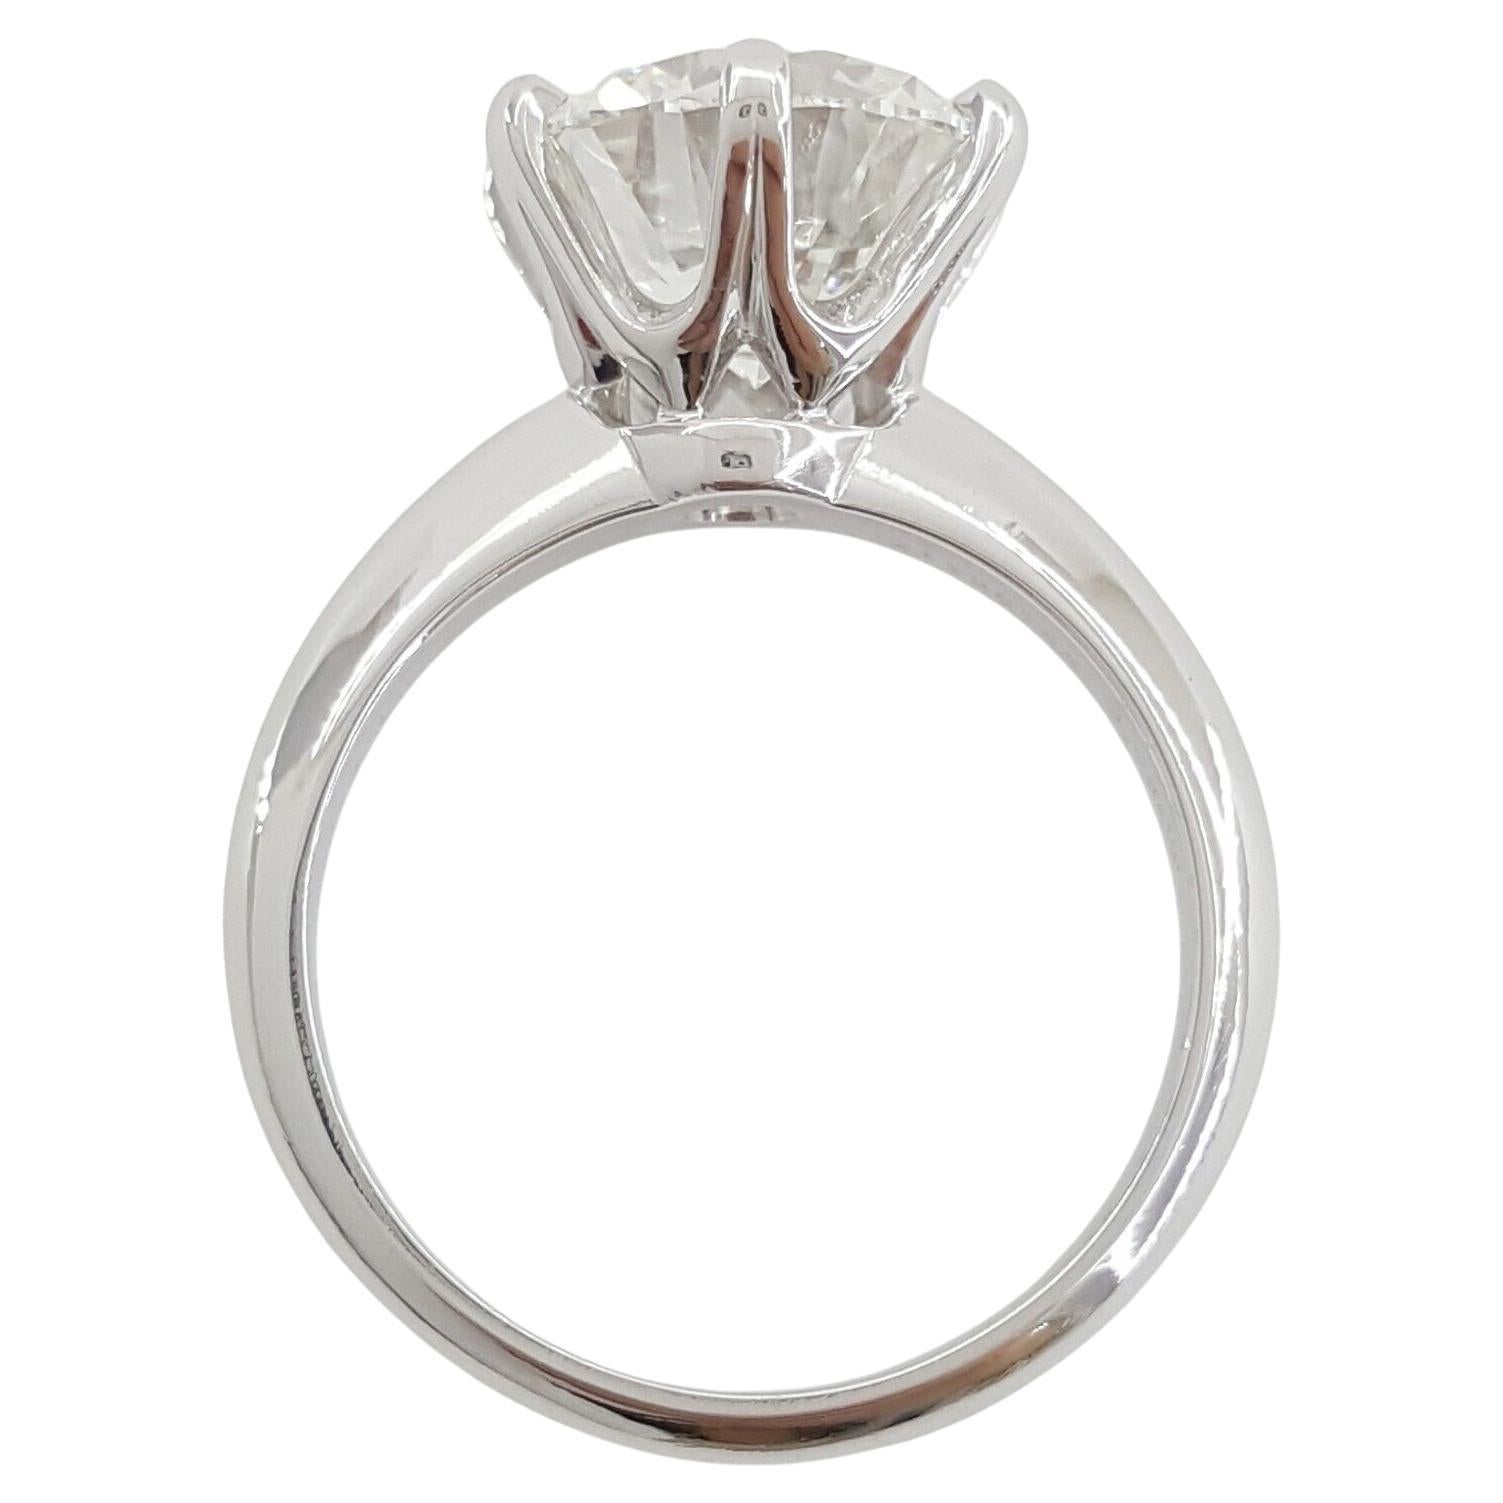 This exquisite engagement ring from Tiffany & Co. is a paragon of classic elegance, meticulously crafted in platinum. The ring, with a weight of 6.6 grams and sized at 5.75, offers a balanced and comfortable fit, and can be sized to accommodate most